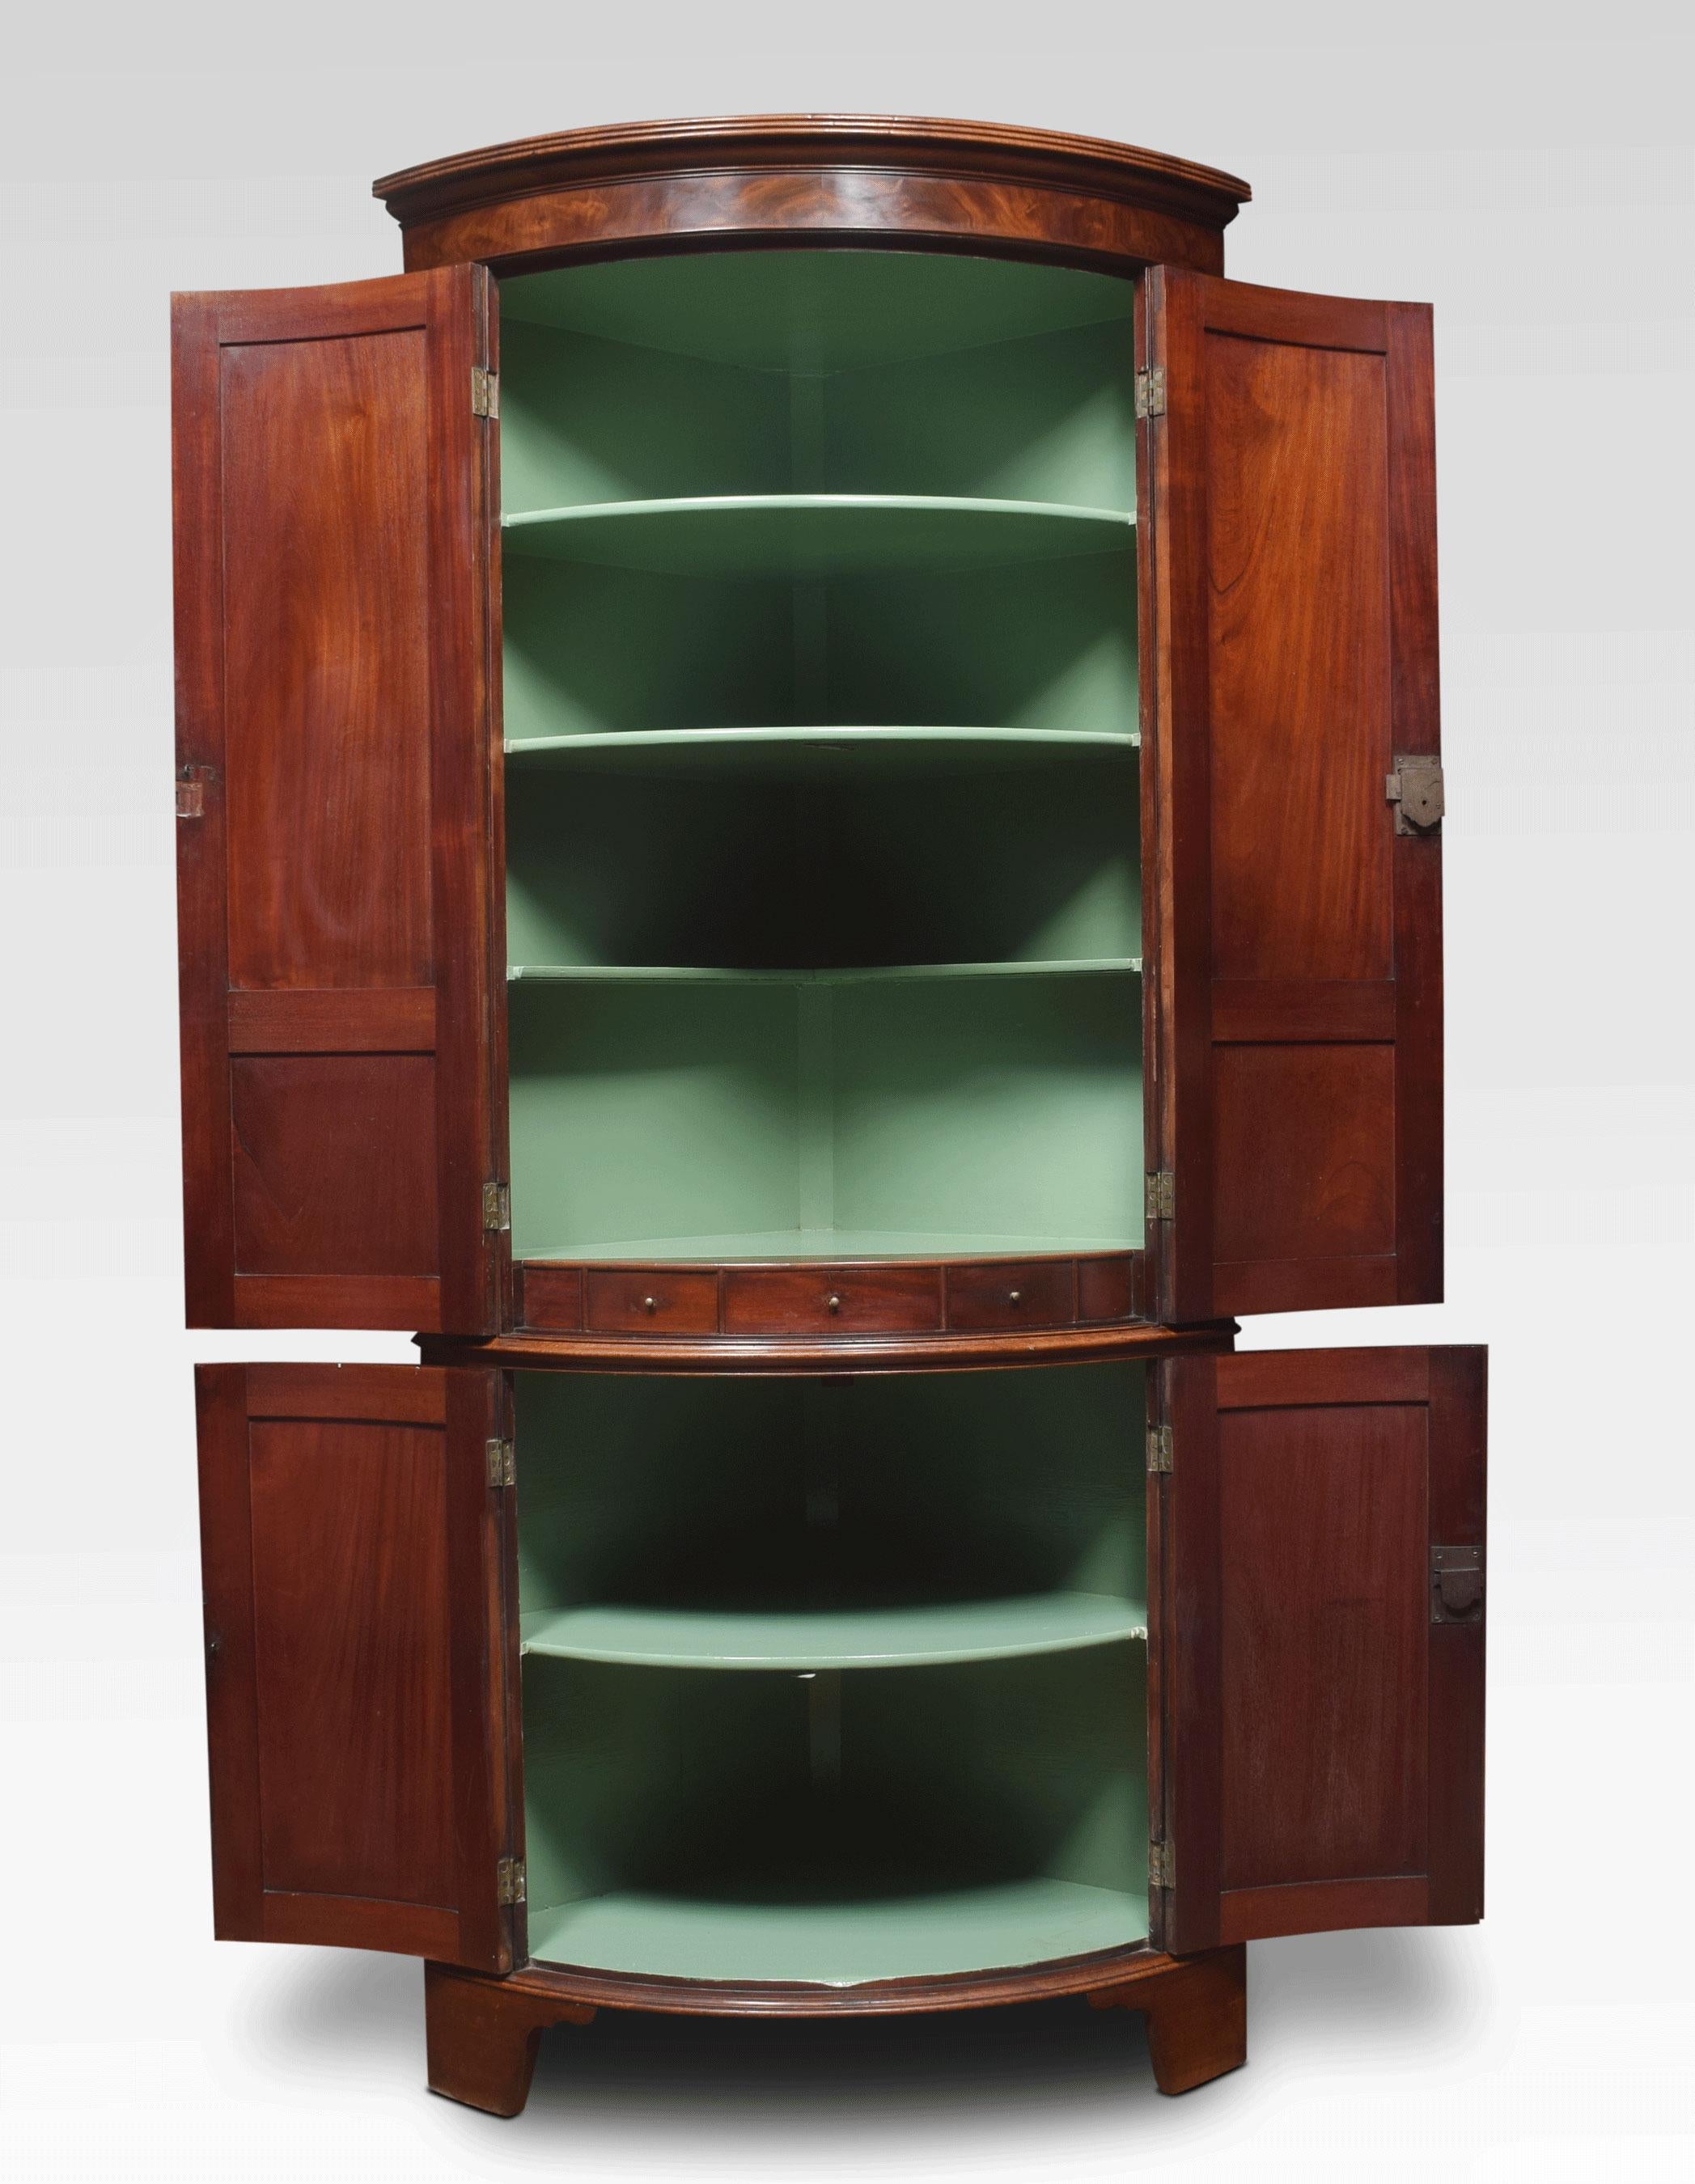 Early 19th century George III mahogany floor standing corner cabinet. The molded cornice above a pair of flame paneled doors enclosing a shelved interior with three short drawers below. The base section with similar panel doors, all raised up on